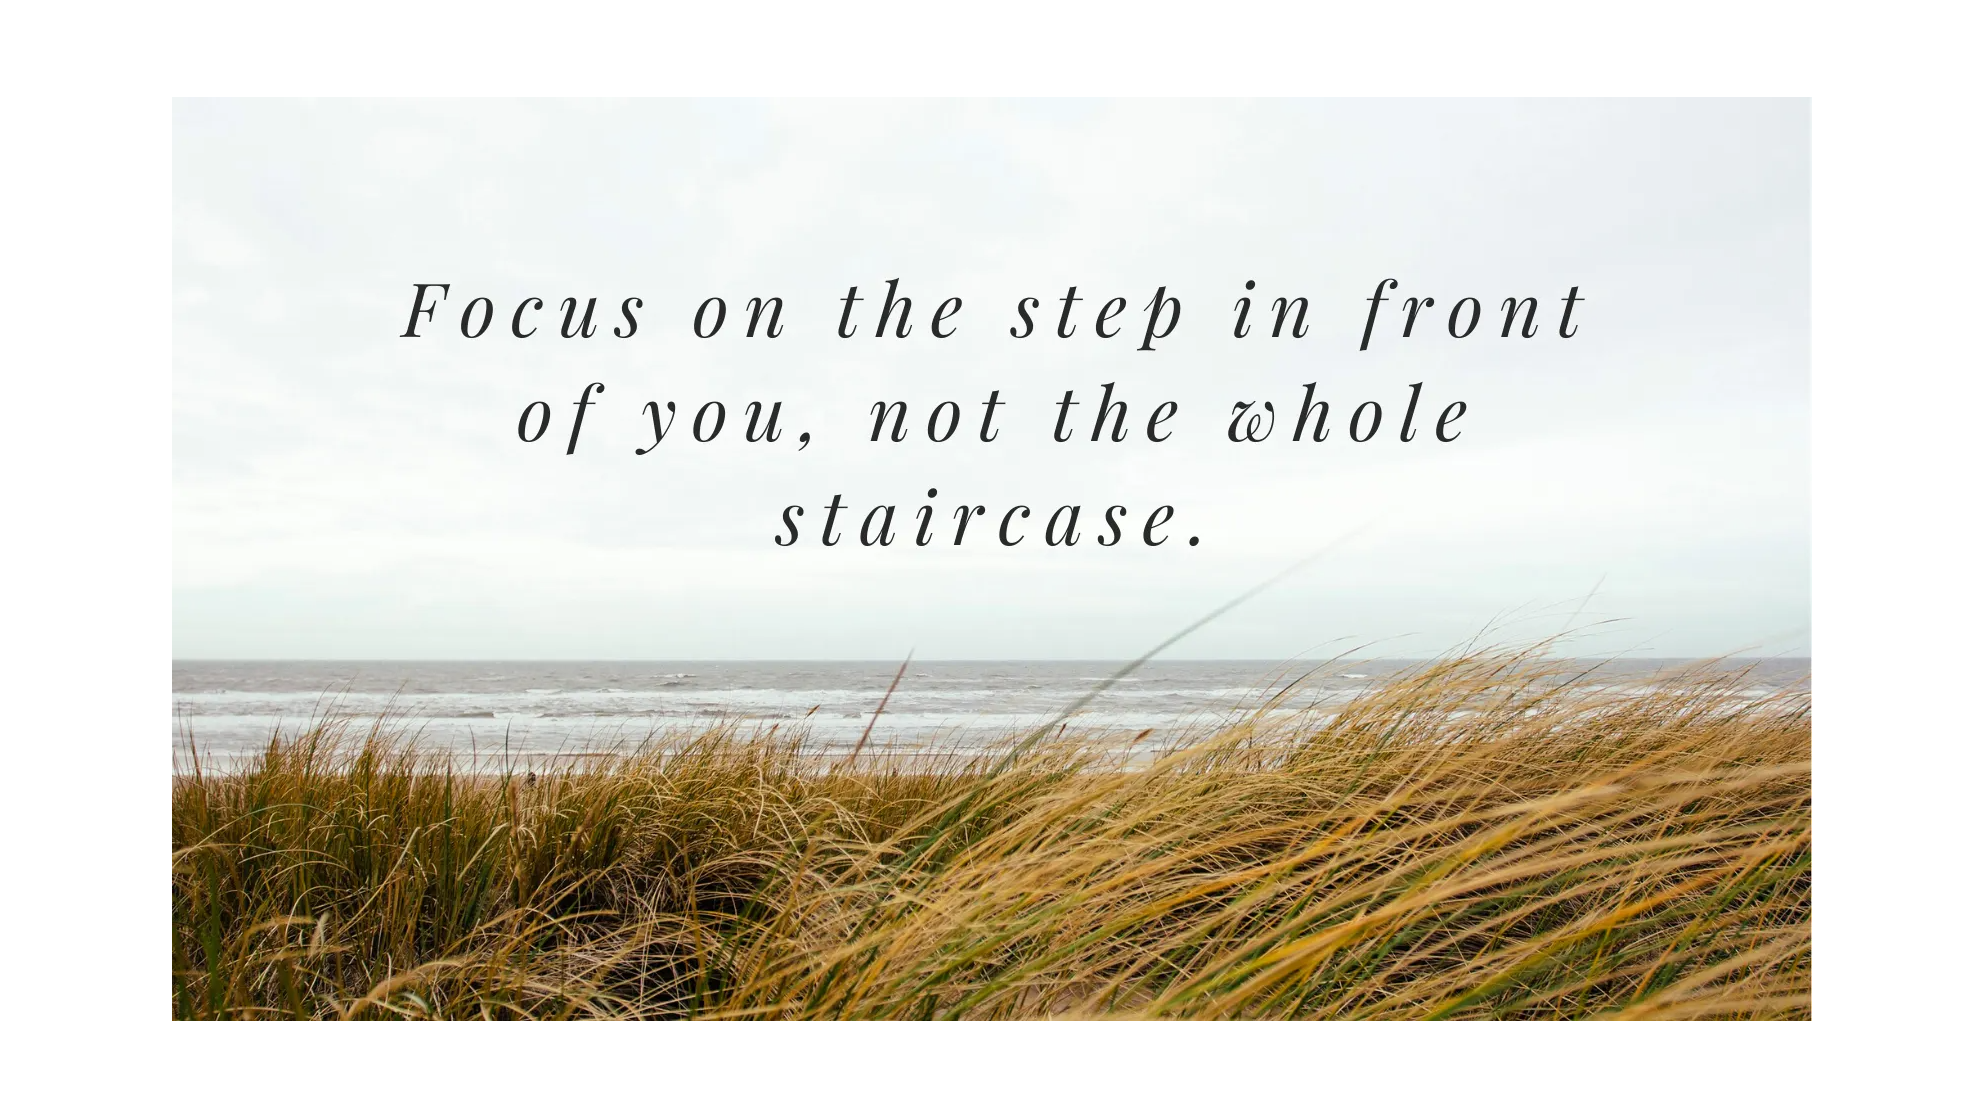 Quote: Focus on the step in front of you, not the whole staircase